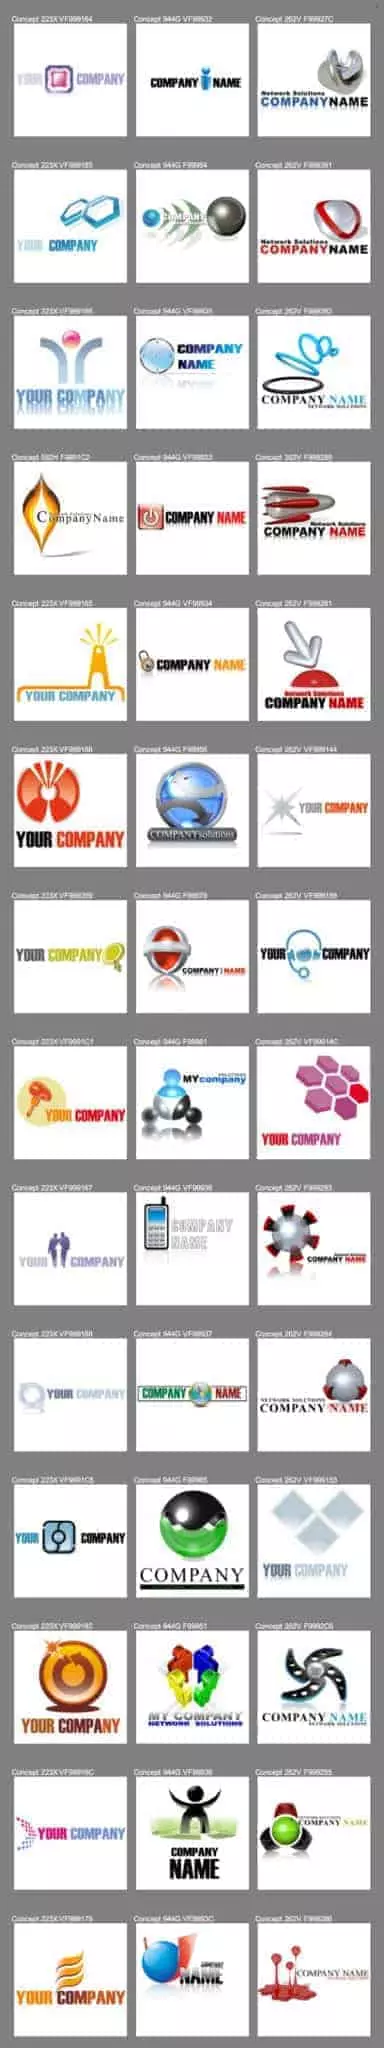 learn the elements of a great logo 2